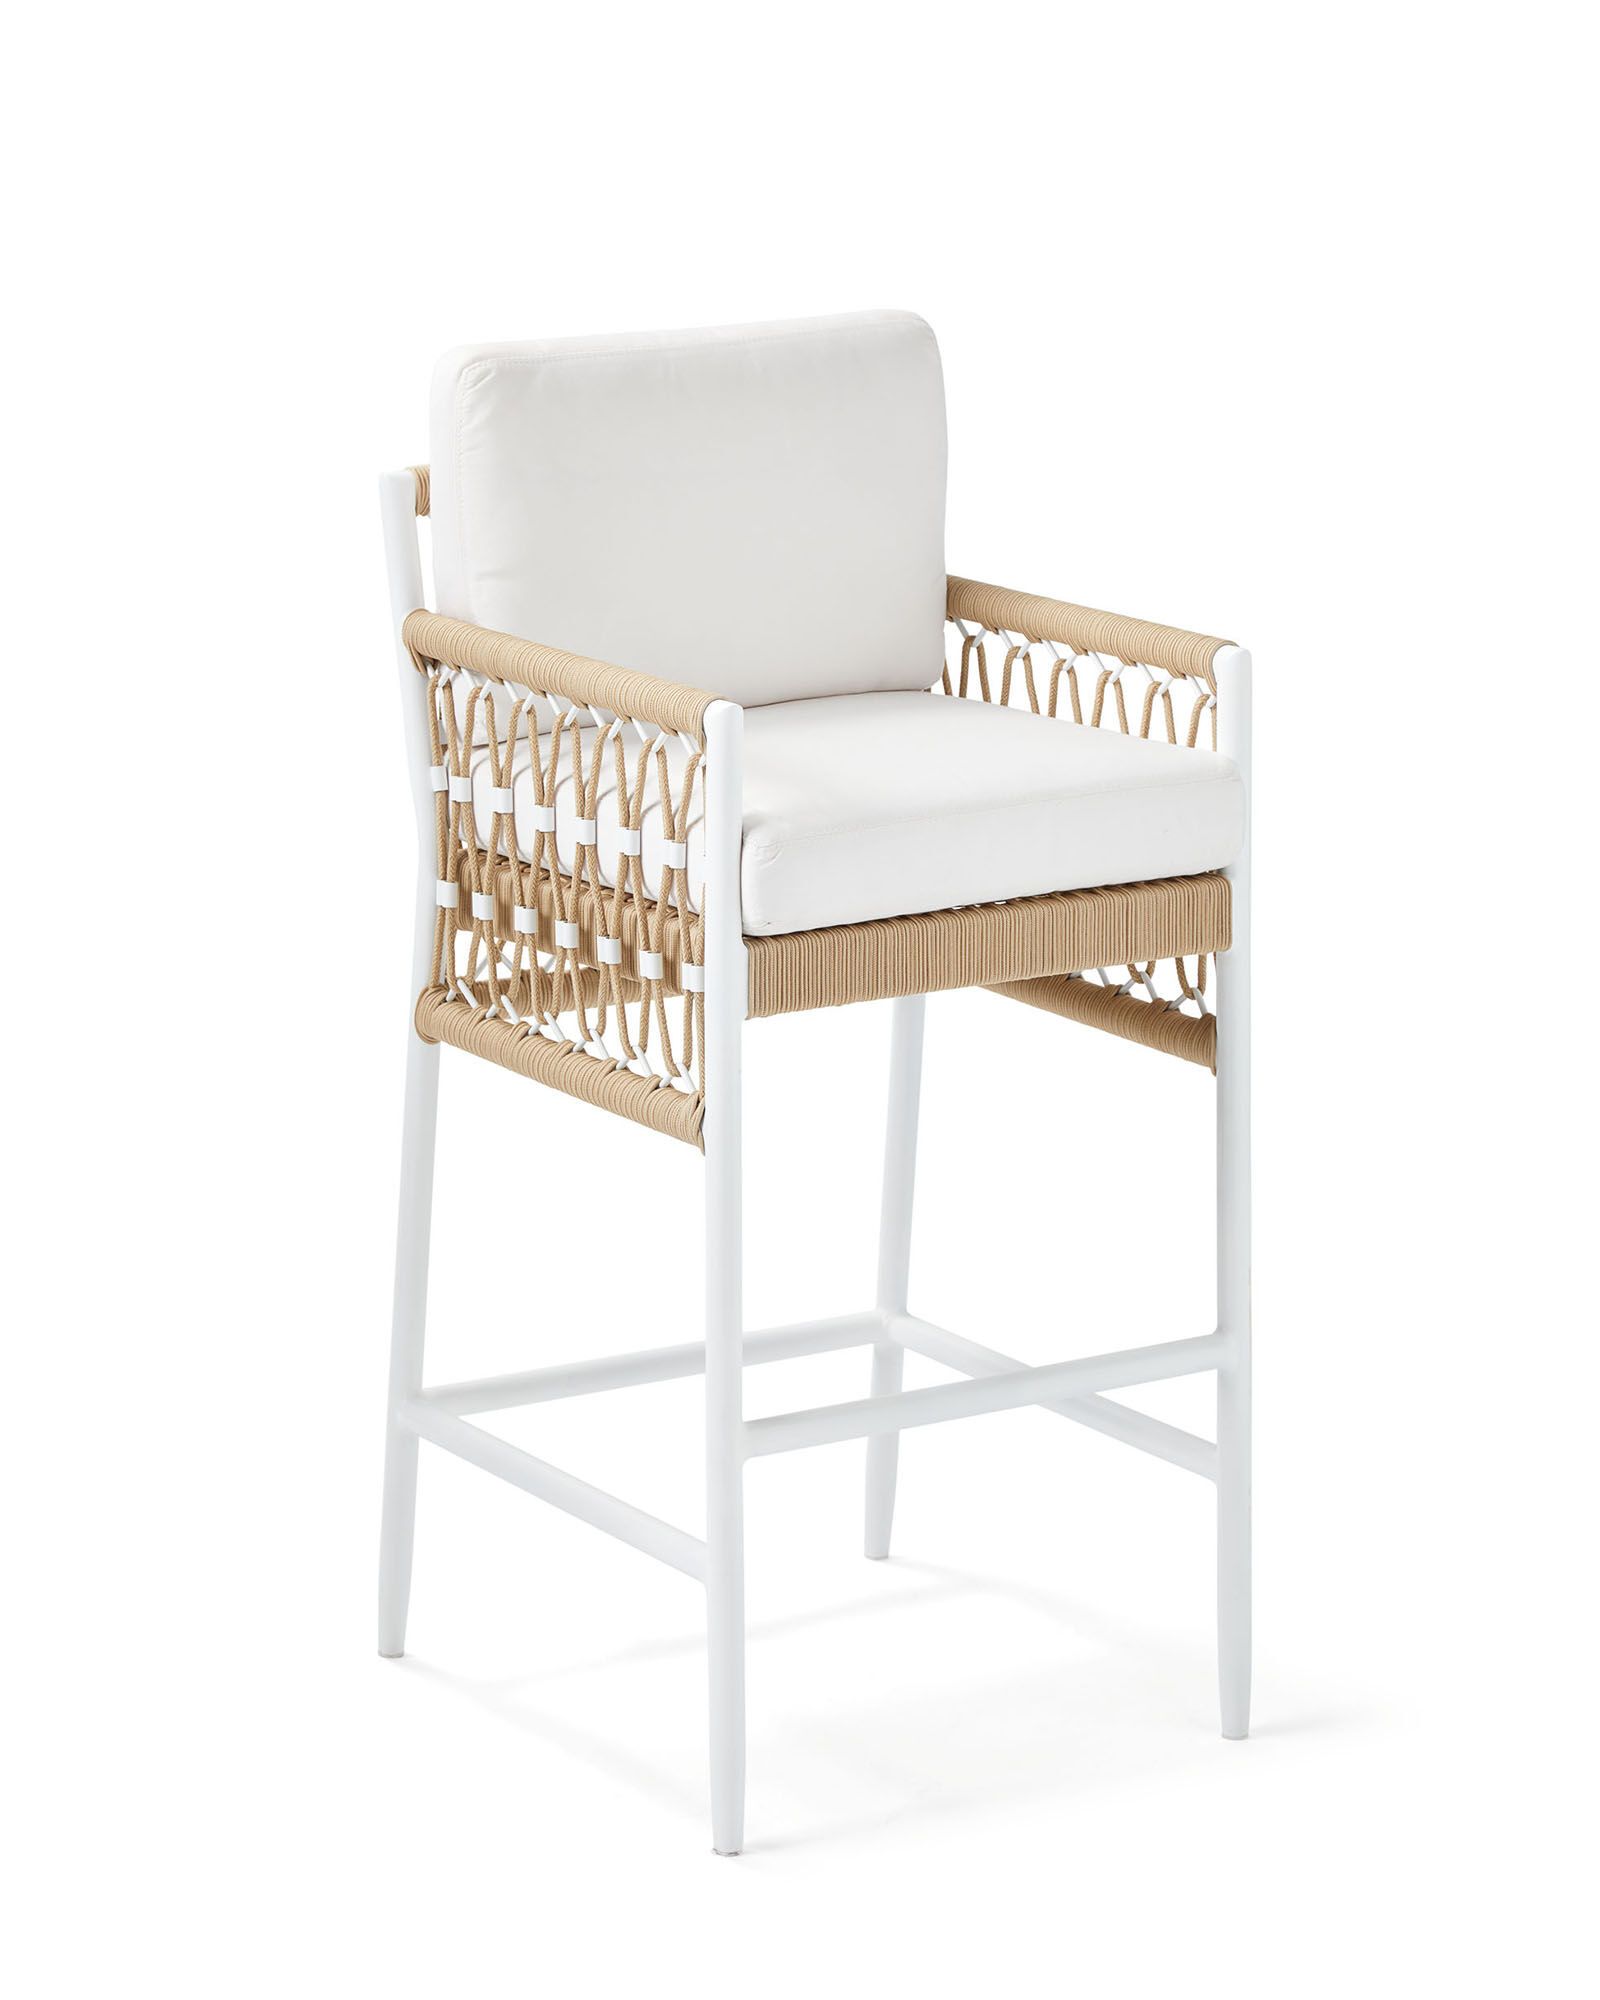 Salt Creek Counter Stool | Serena and Lily